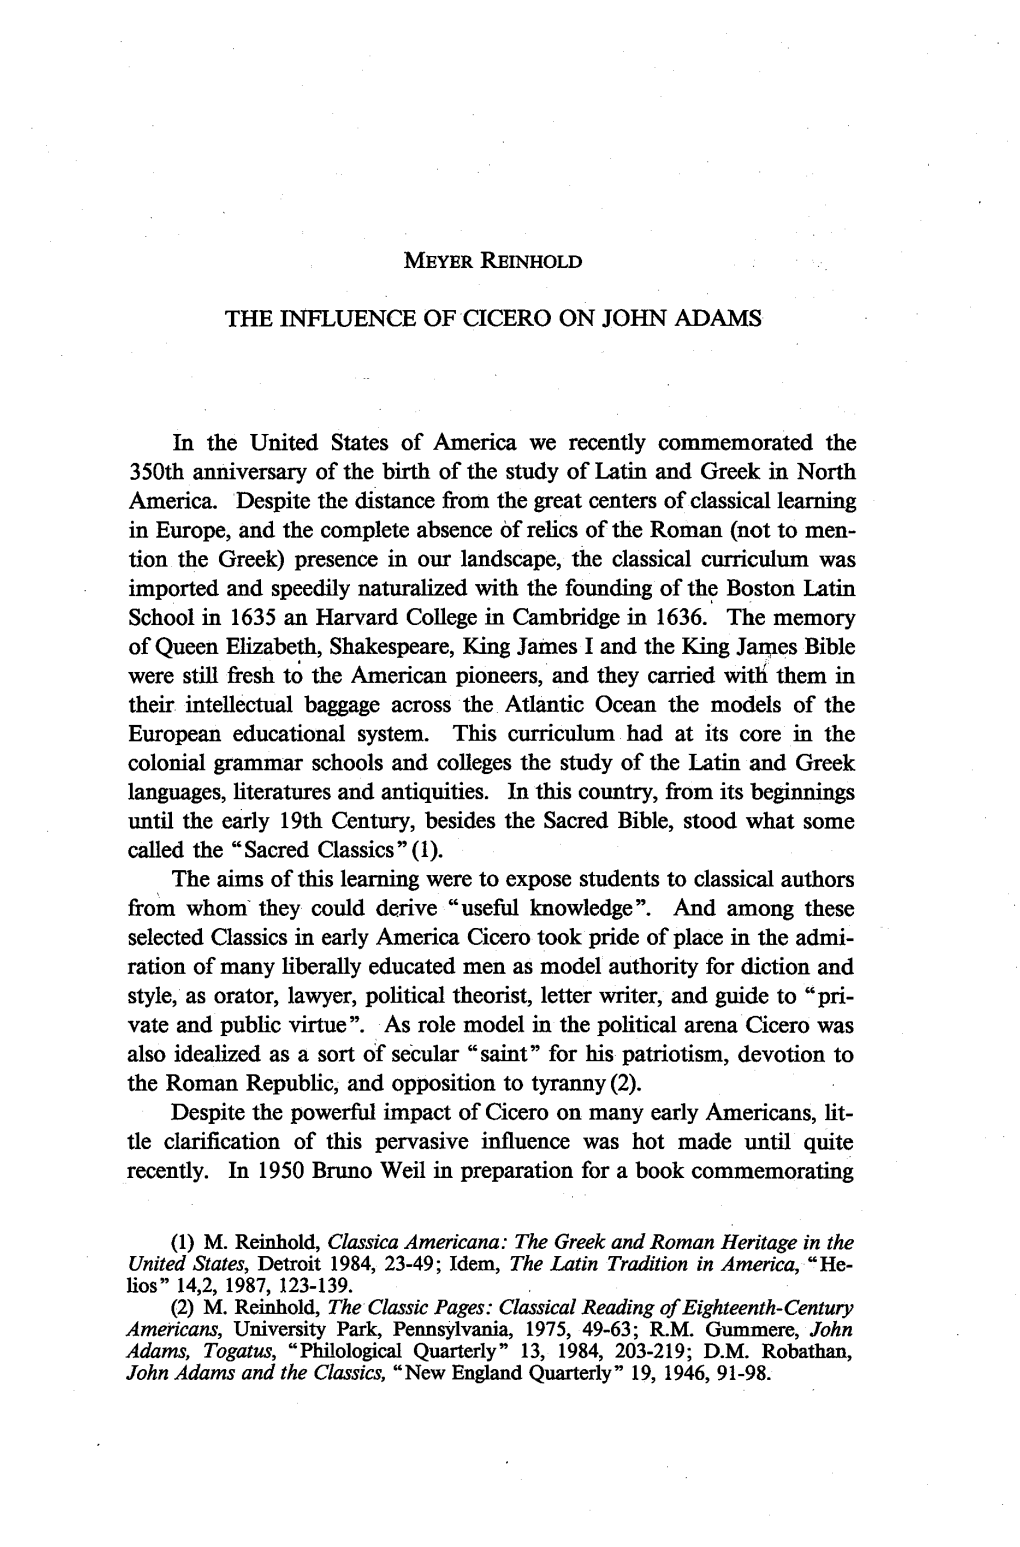 THE INFLUENCE of CICERO on JOHN ADAMS in the United States